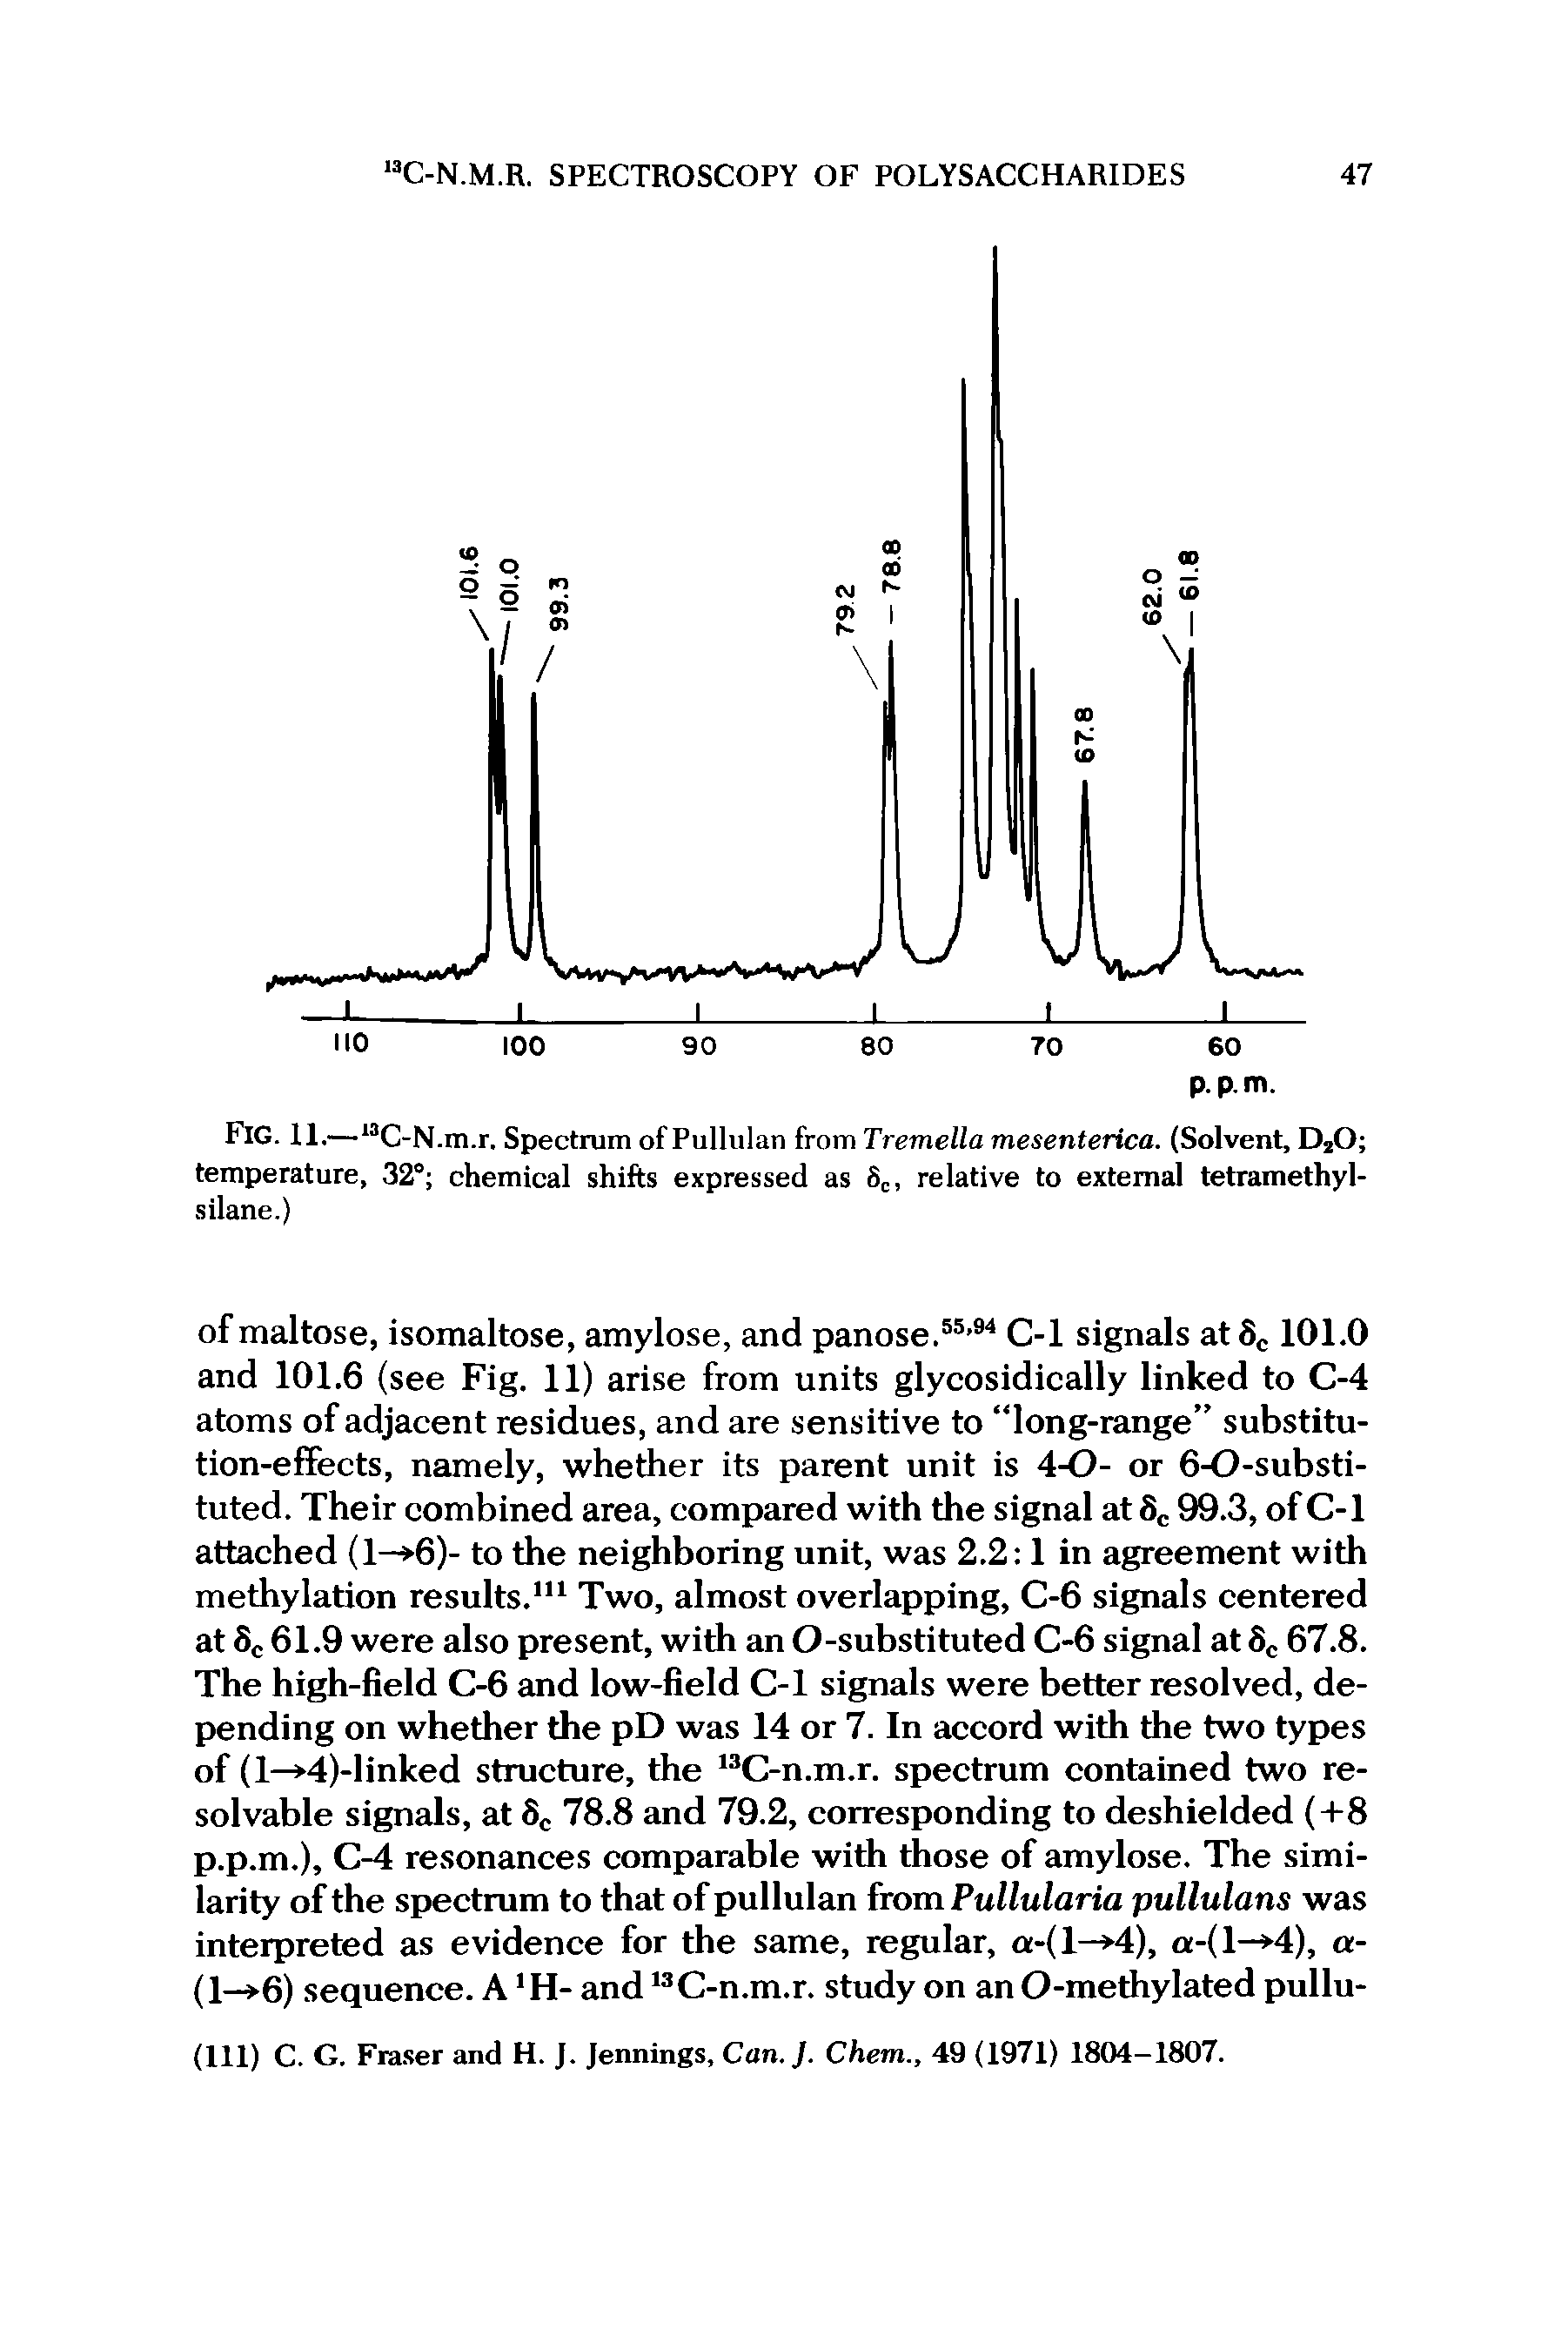 Fig. 11.—13C-N.m.r. Spectrum of Pullulan from Tremella mesenterica. (Solvent, D20 temperature, 32° chemical shifts expressed as 8C, relative to external tetramethyl-silane.)...